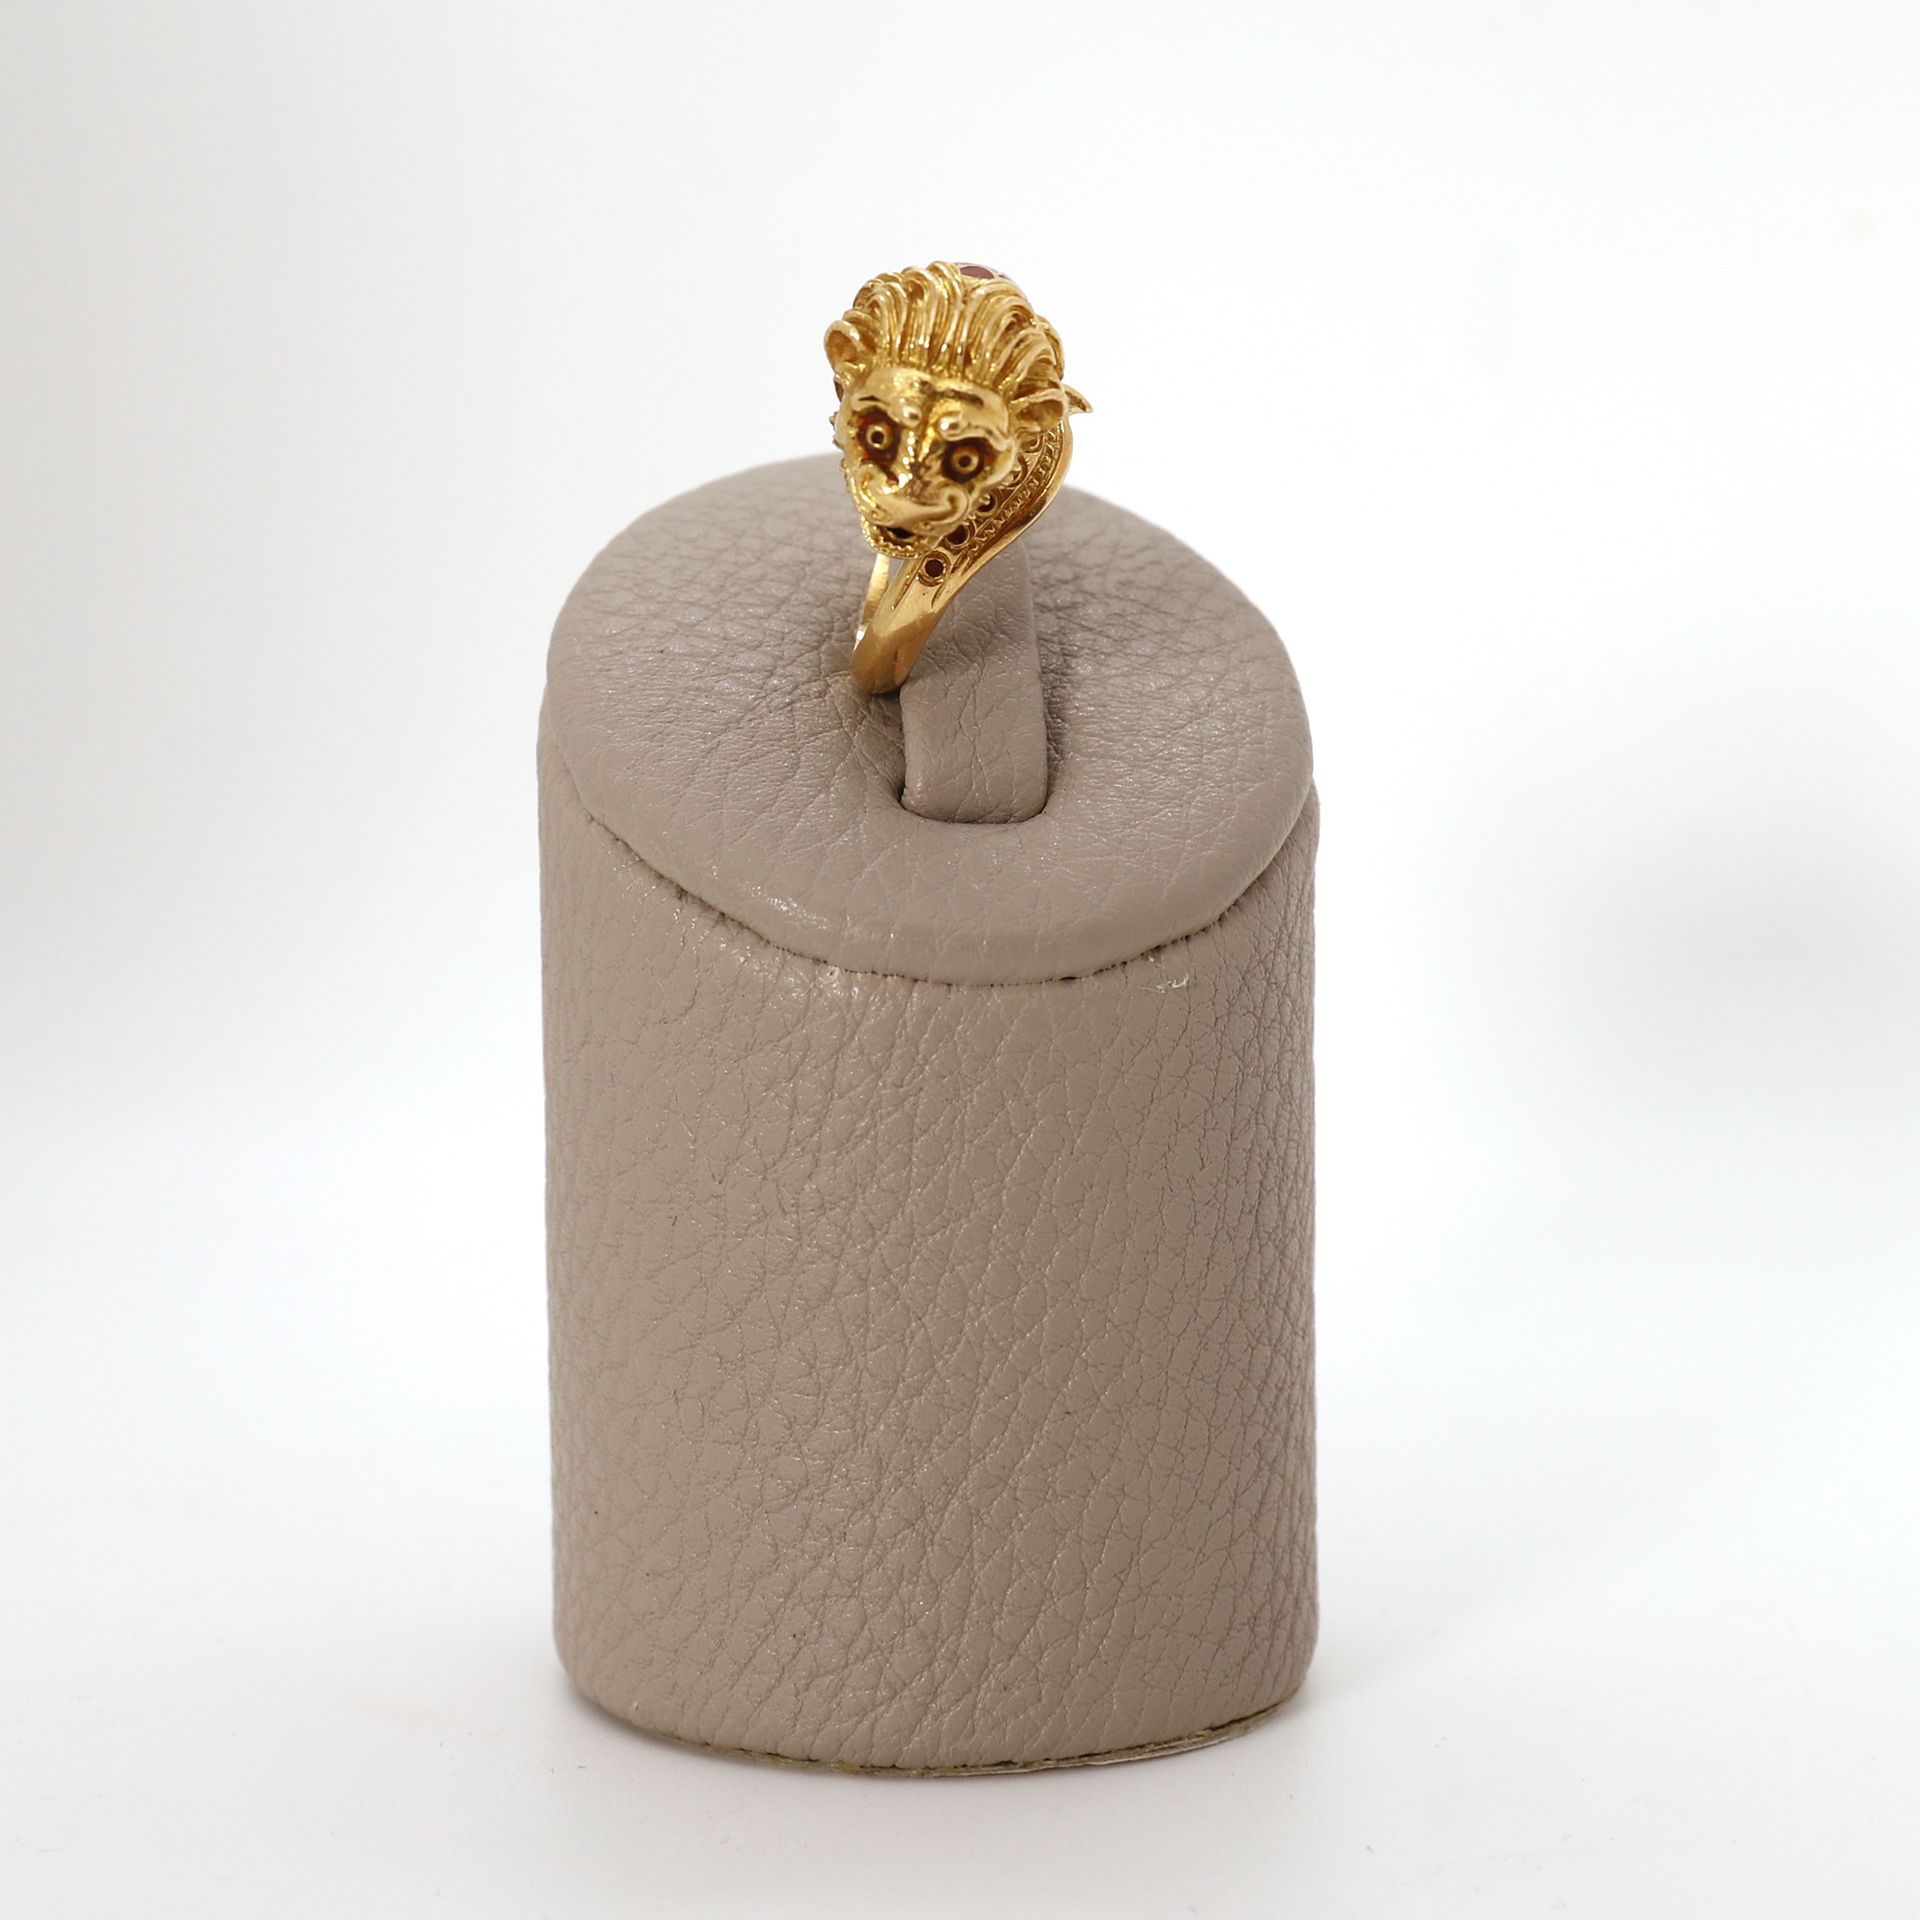 Null LION'S HEAD" RING IN YELLOW GOLD AND ENAMEL

Tdd : 46

Pb : 8 grs